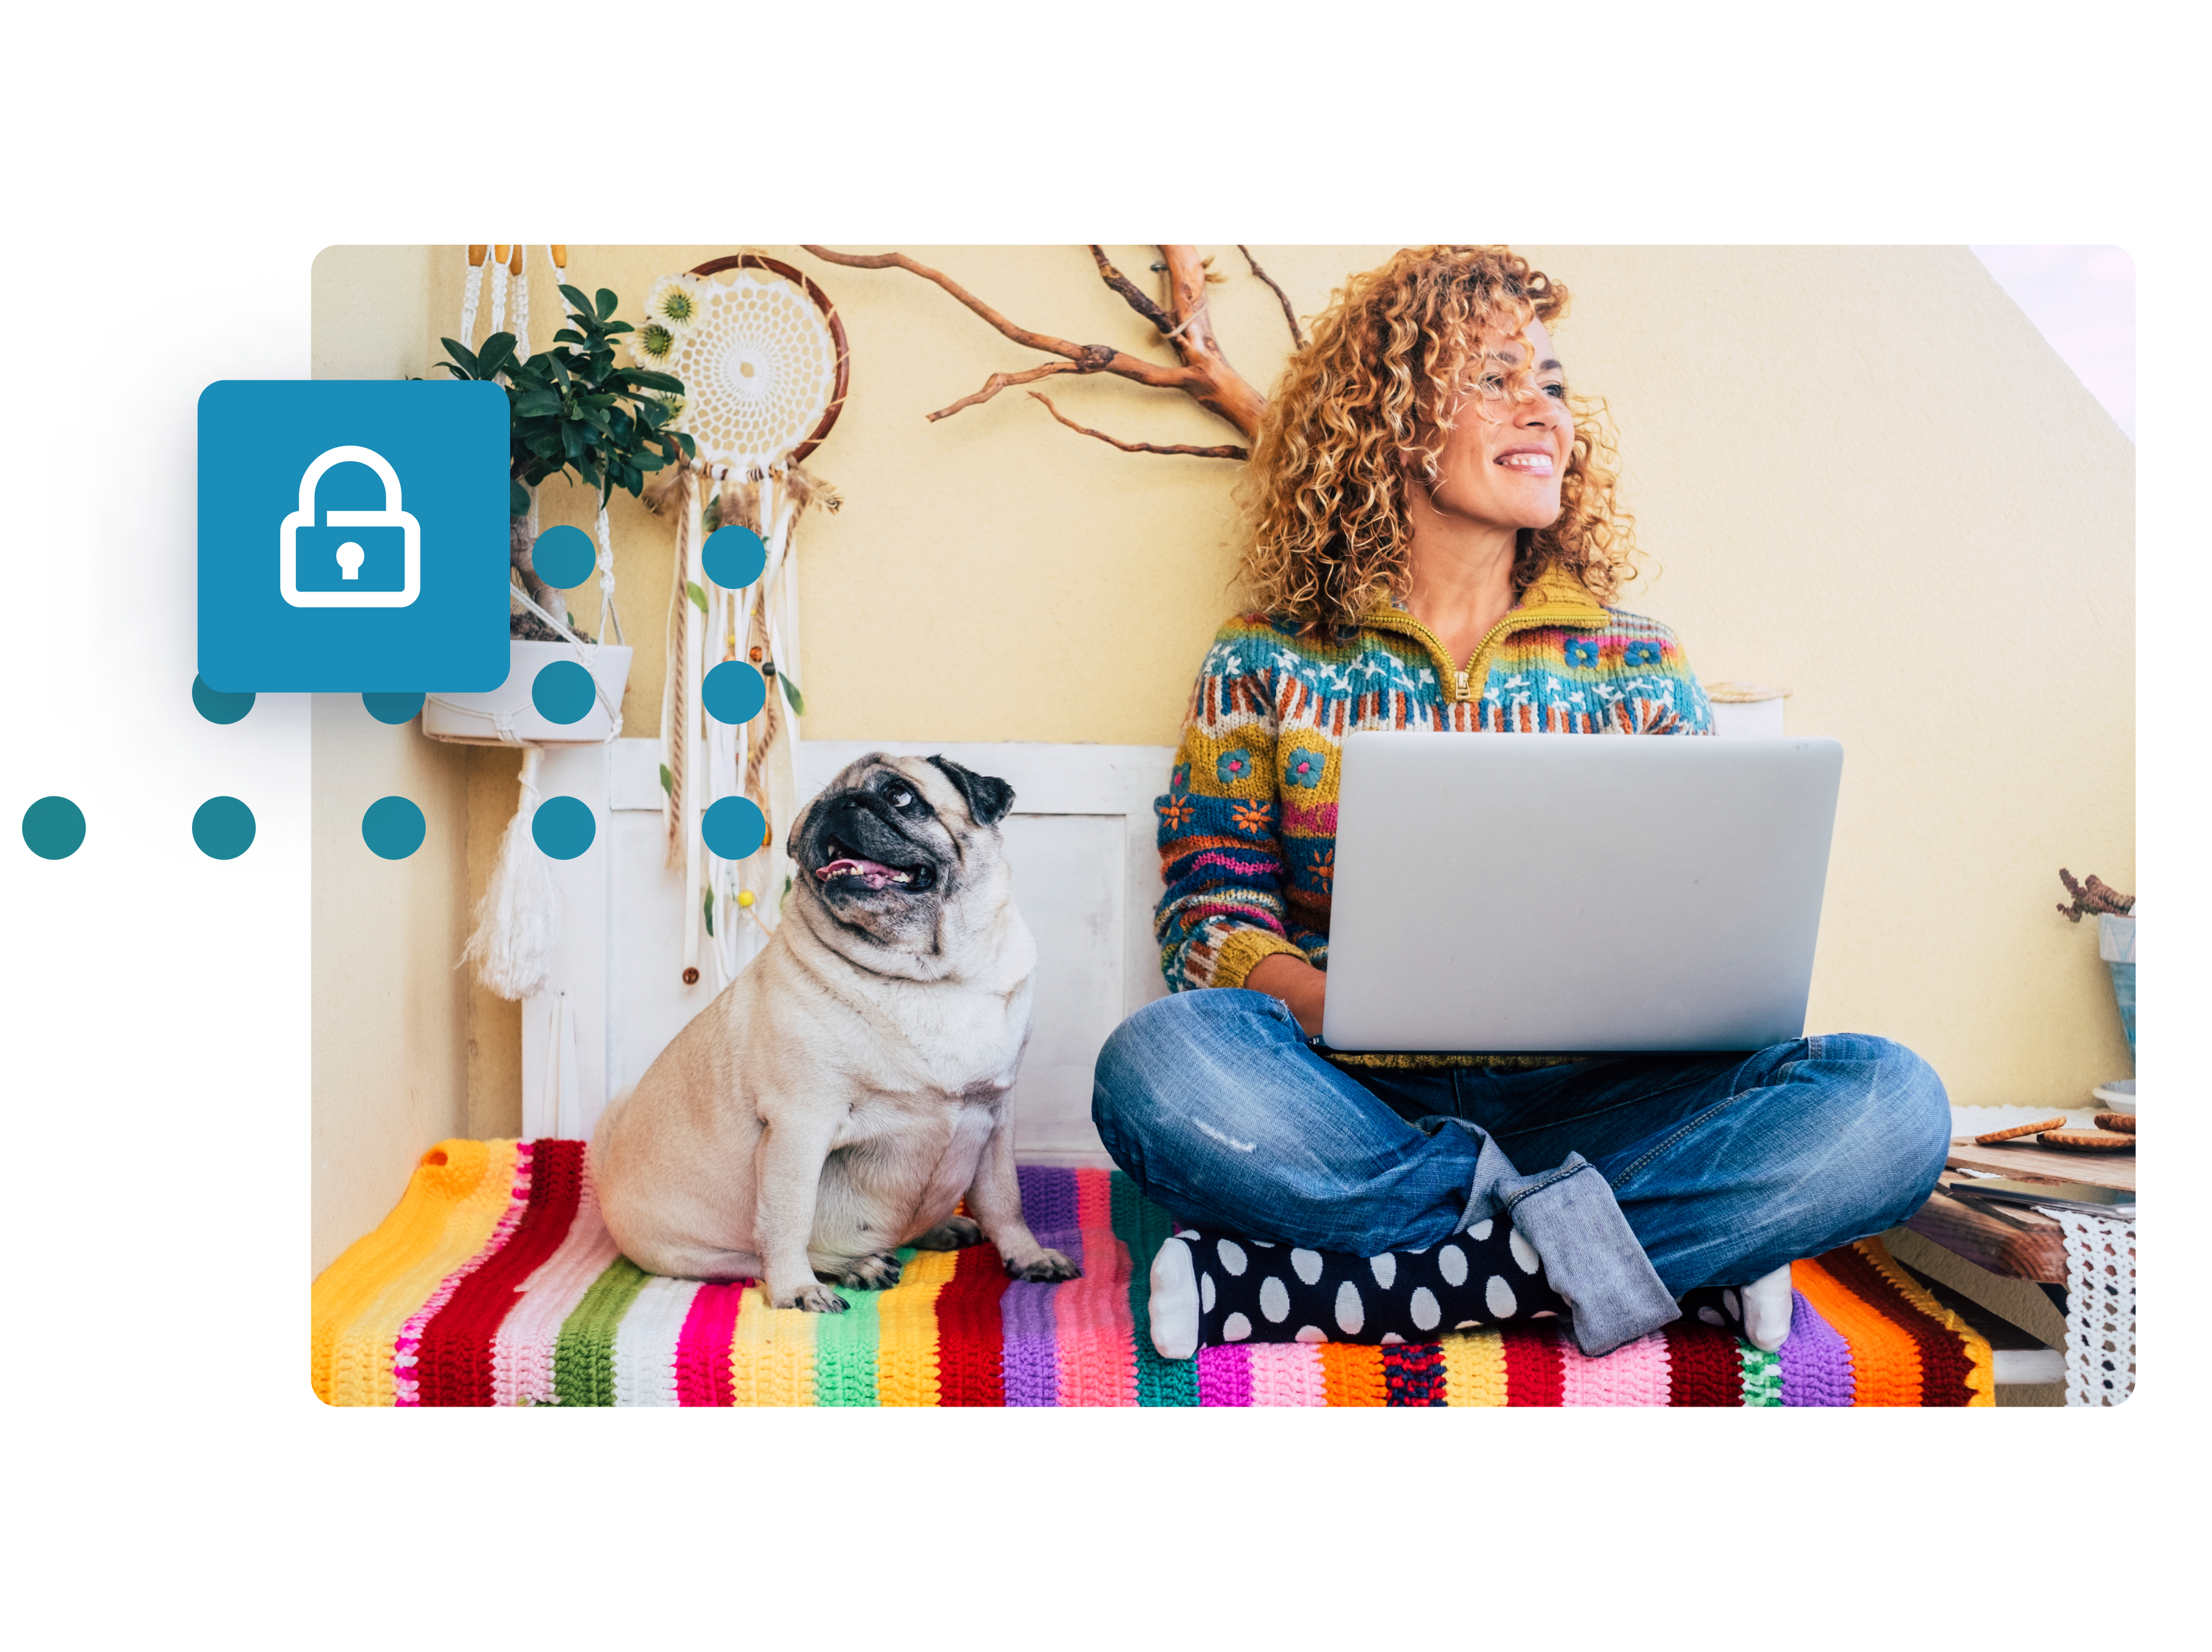 An image of a woman sat on the floor with her legs crossed and laptop in her lap. She is sat next to a pug and is smiling